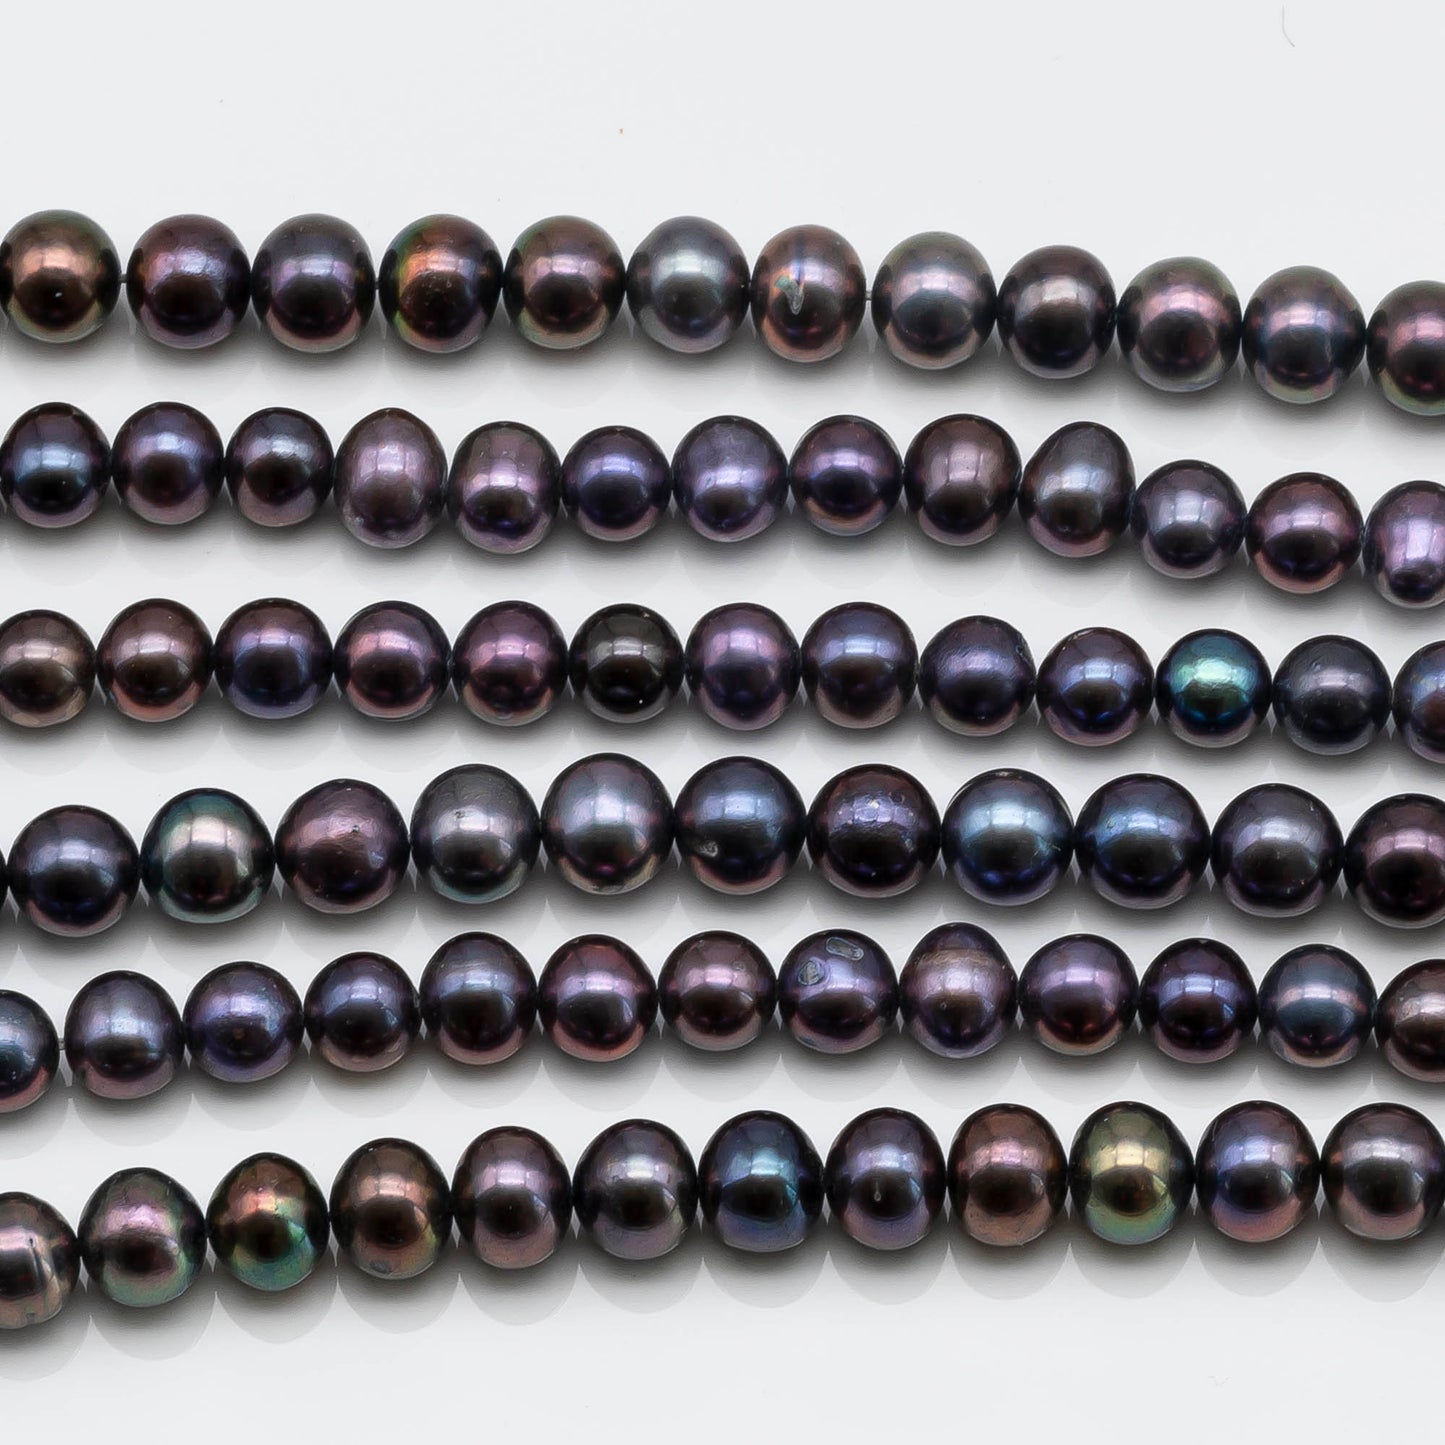 6-8mm Peacock Purple Freshwater Pearl Beads Round Shape with High Luster for Jewelry Making, SKU # 1623FW